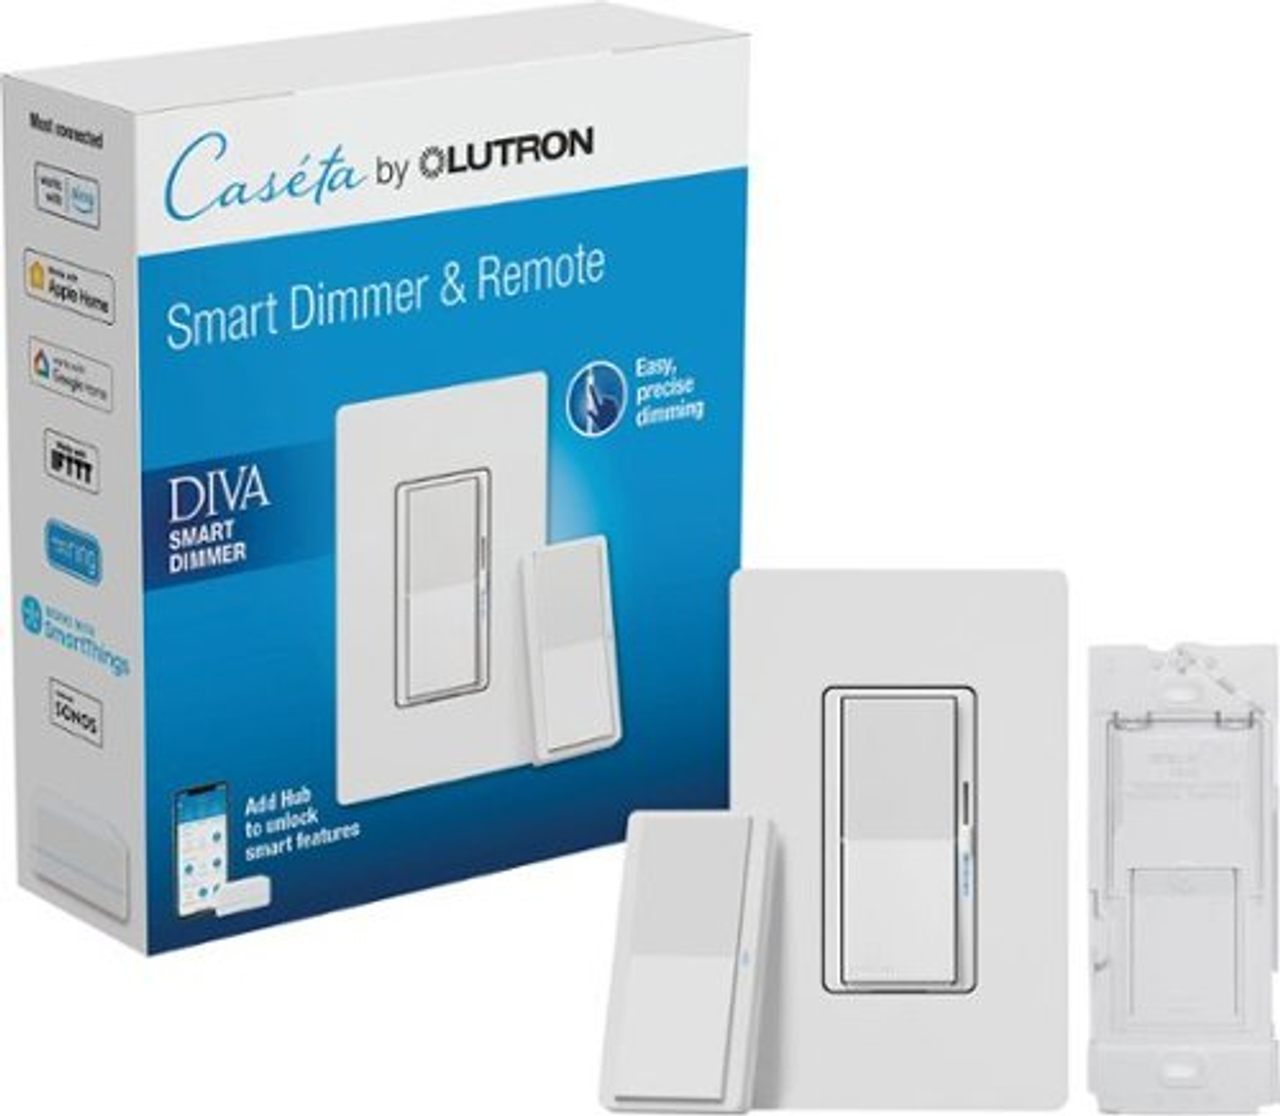 Lutron - Diva Smart Dimmer Switch 3-Way Kit with Pico Paddle Remote, 150-Watt LED, White (DVRF-PKG1D-WH-R) - White